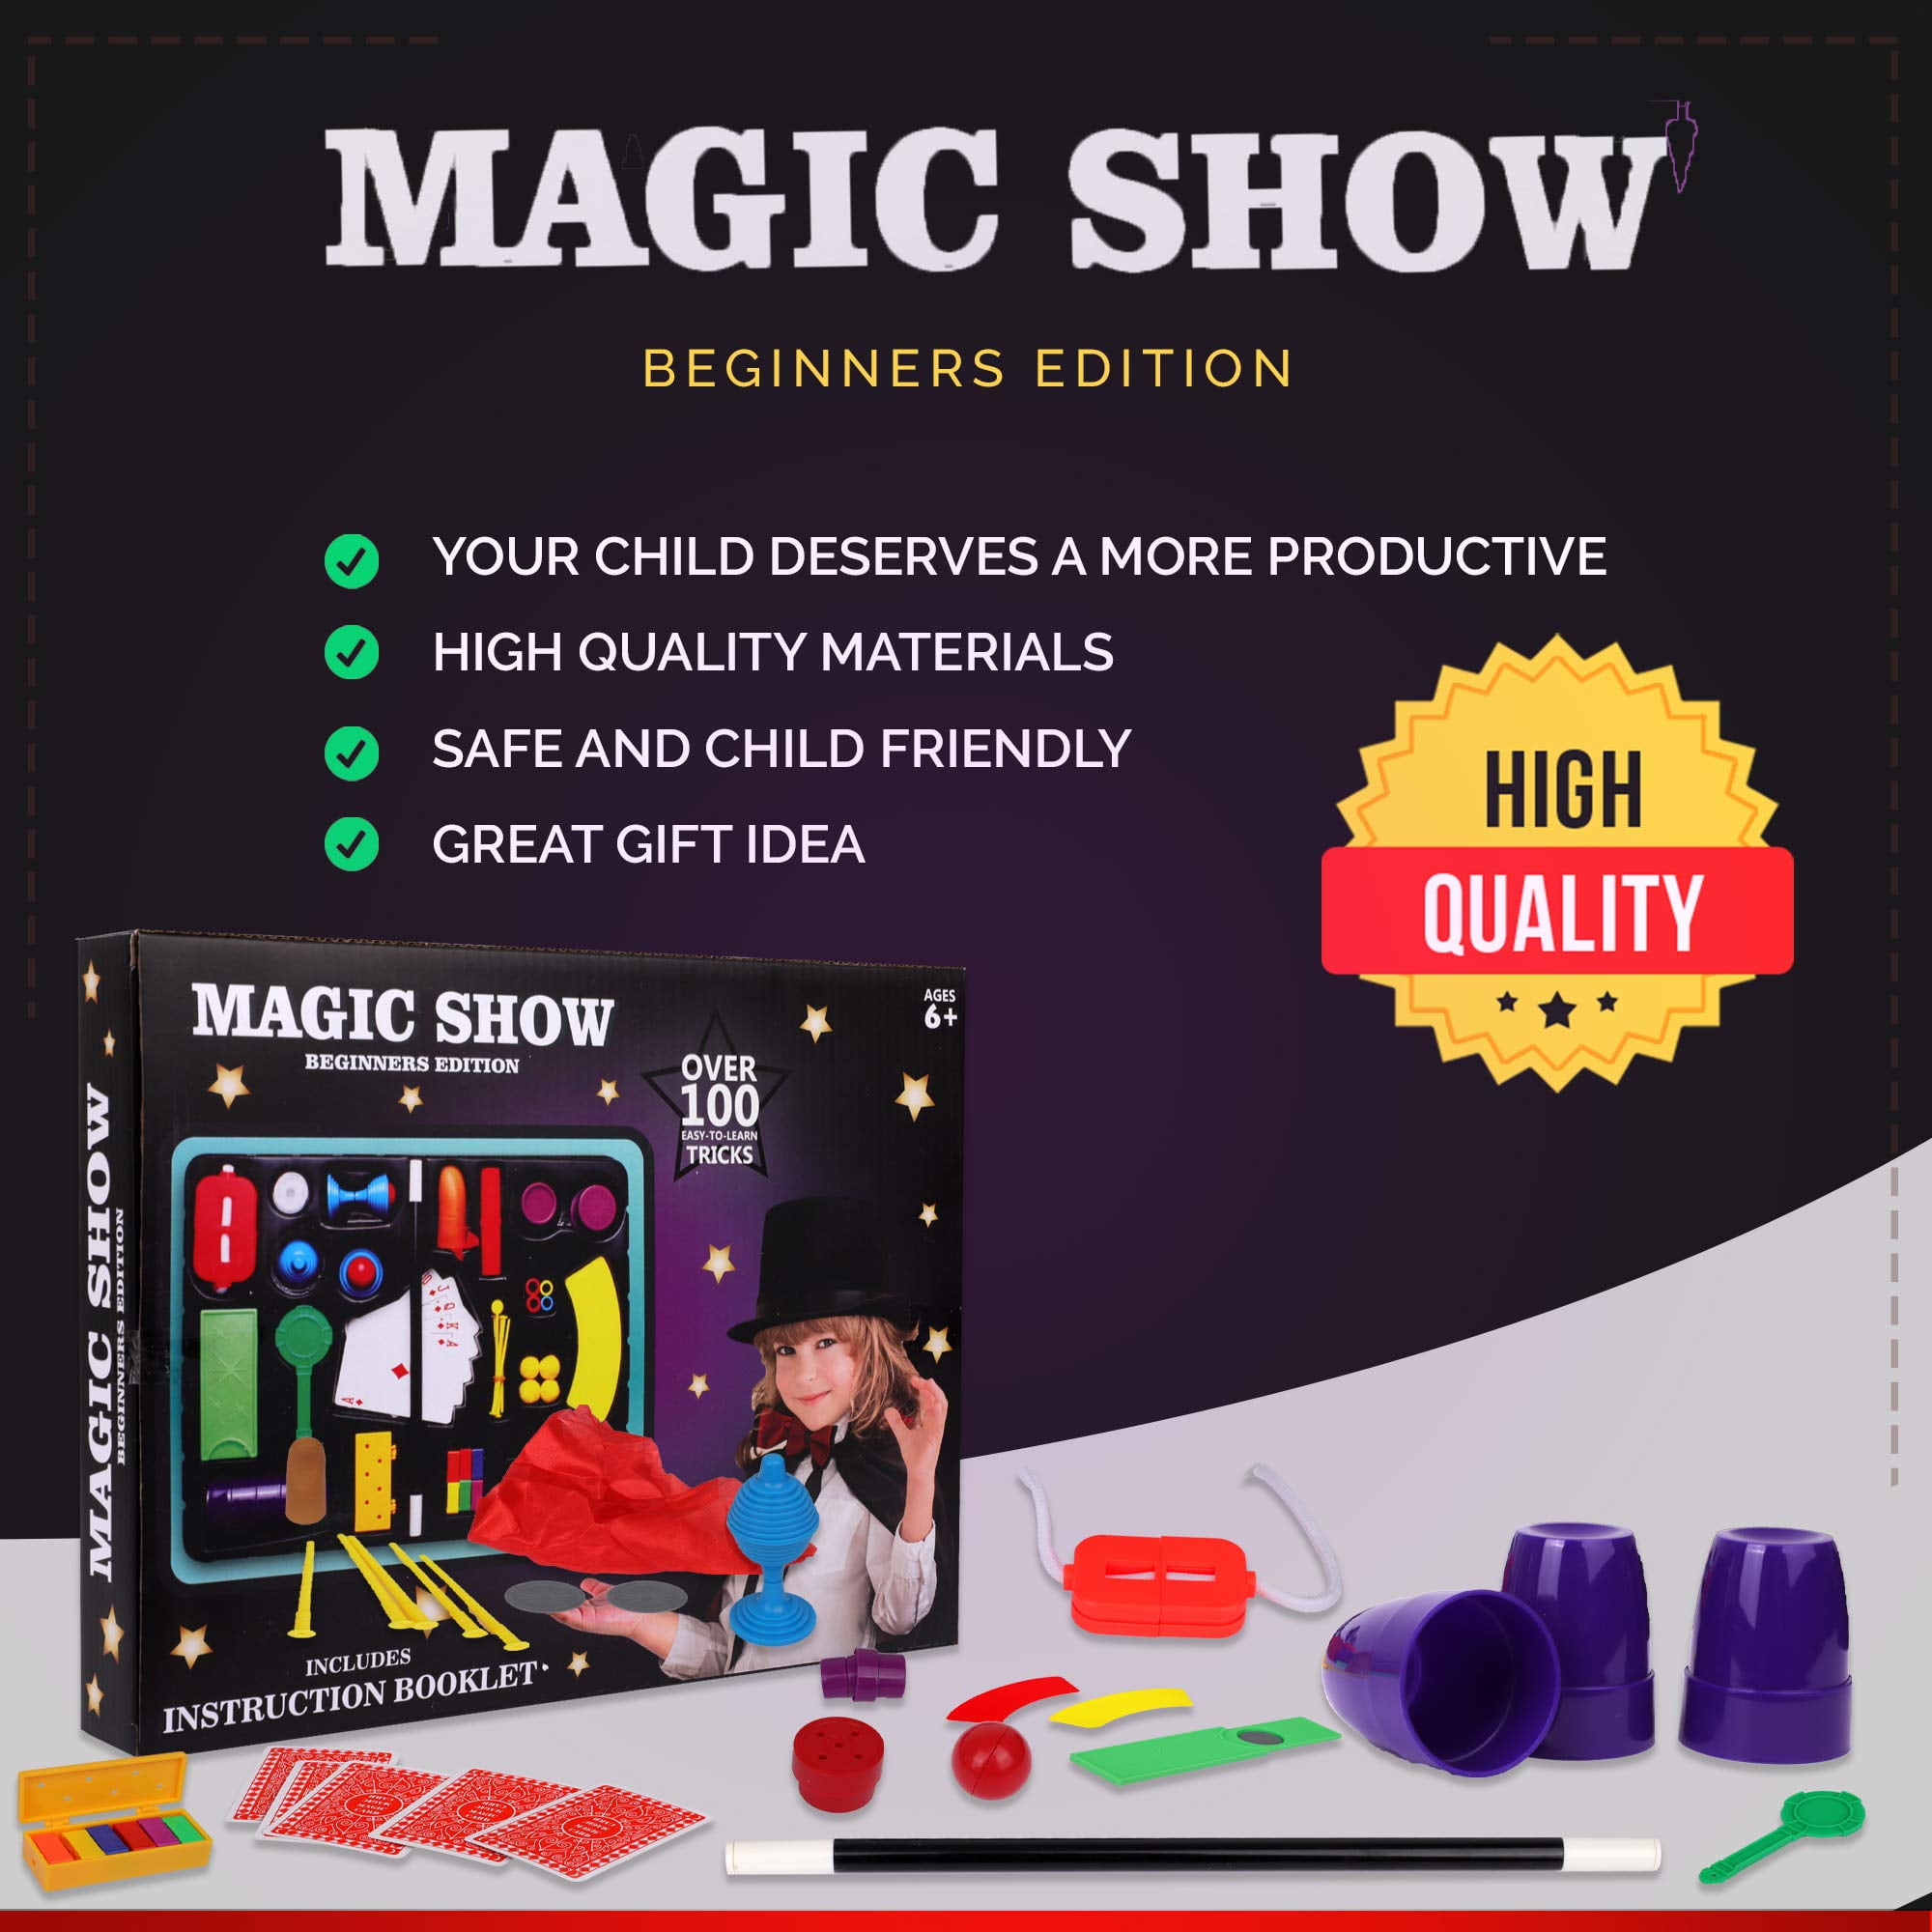 Playkidz Magic Trick for Kids Set 1 - Magic Set with Over 35 Tricks Made  Simple, Magician Pretend Play Set with Wand & More Magic Tricks - Easy to